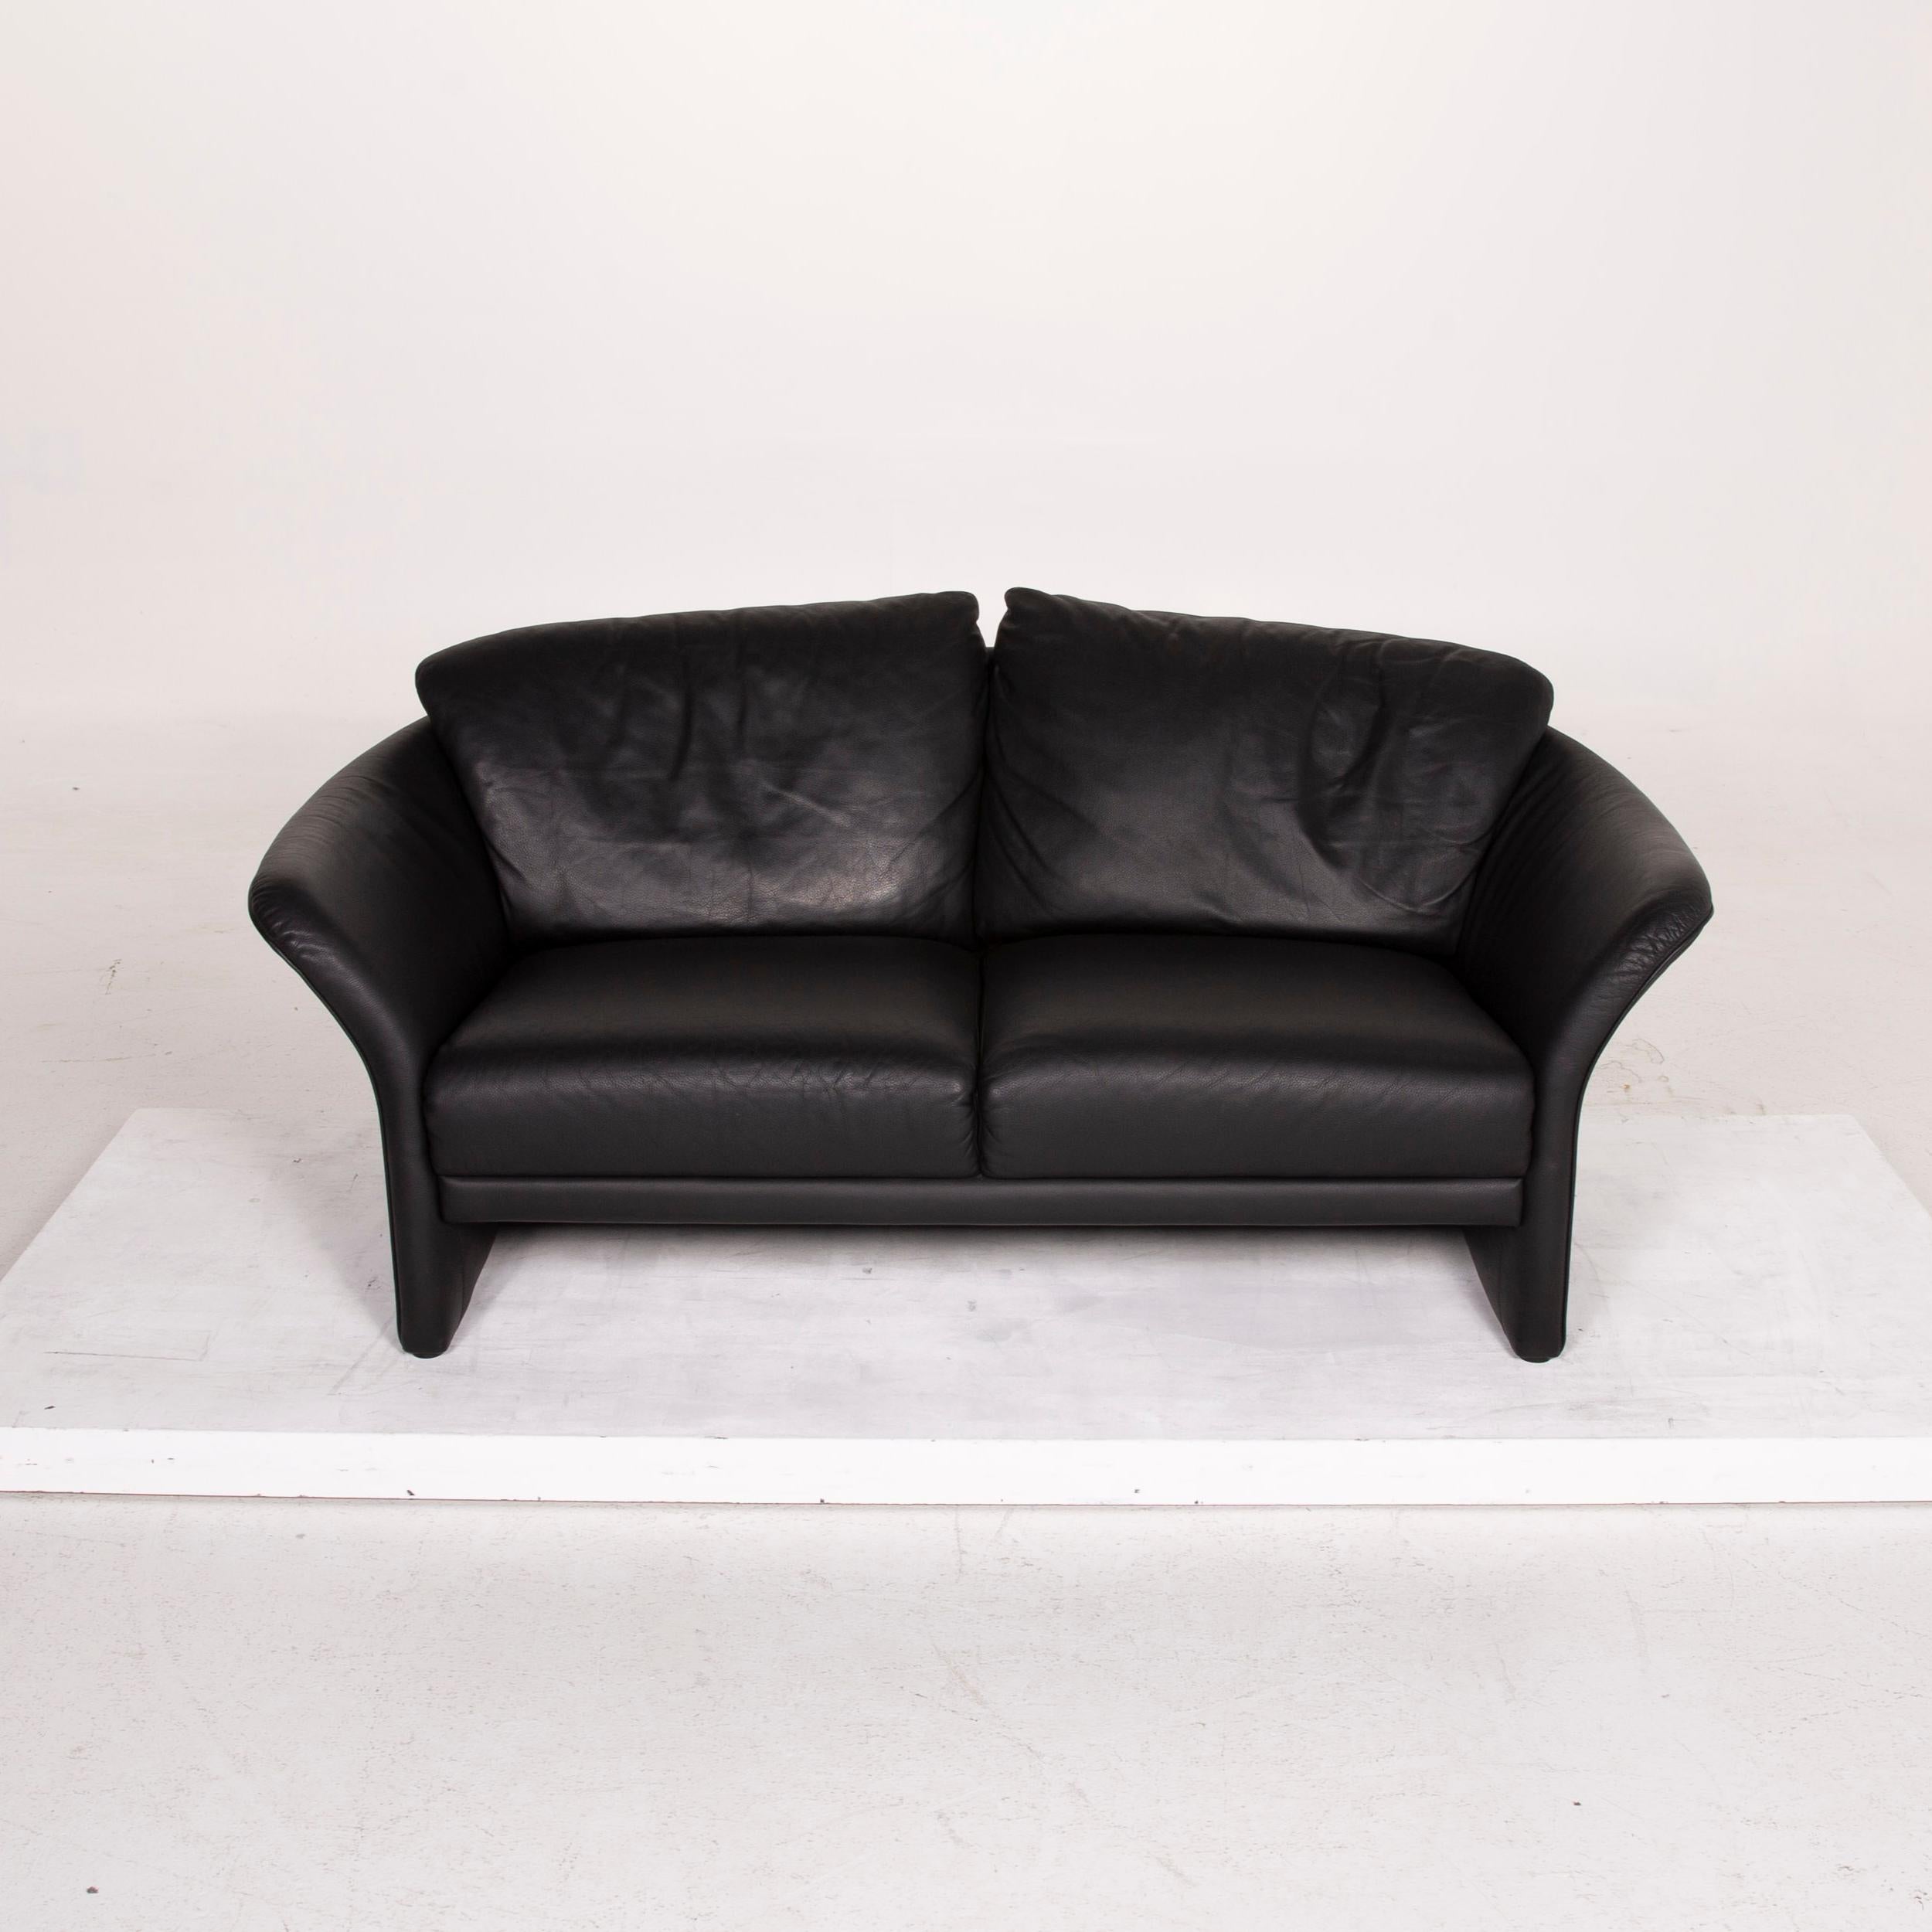 Brühl & Sippold Boa Leather Sofa Black Two-Seat In Good Condition For Sale In Cologne, DE